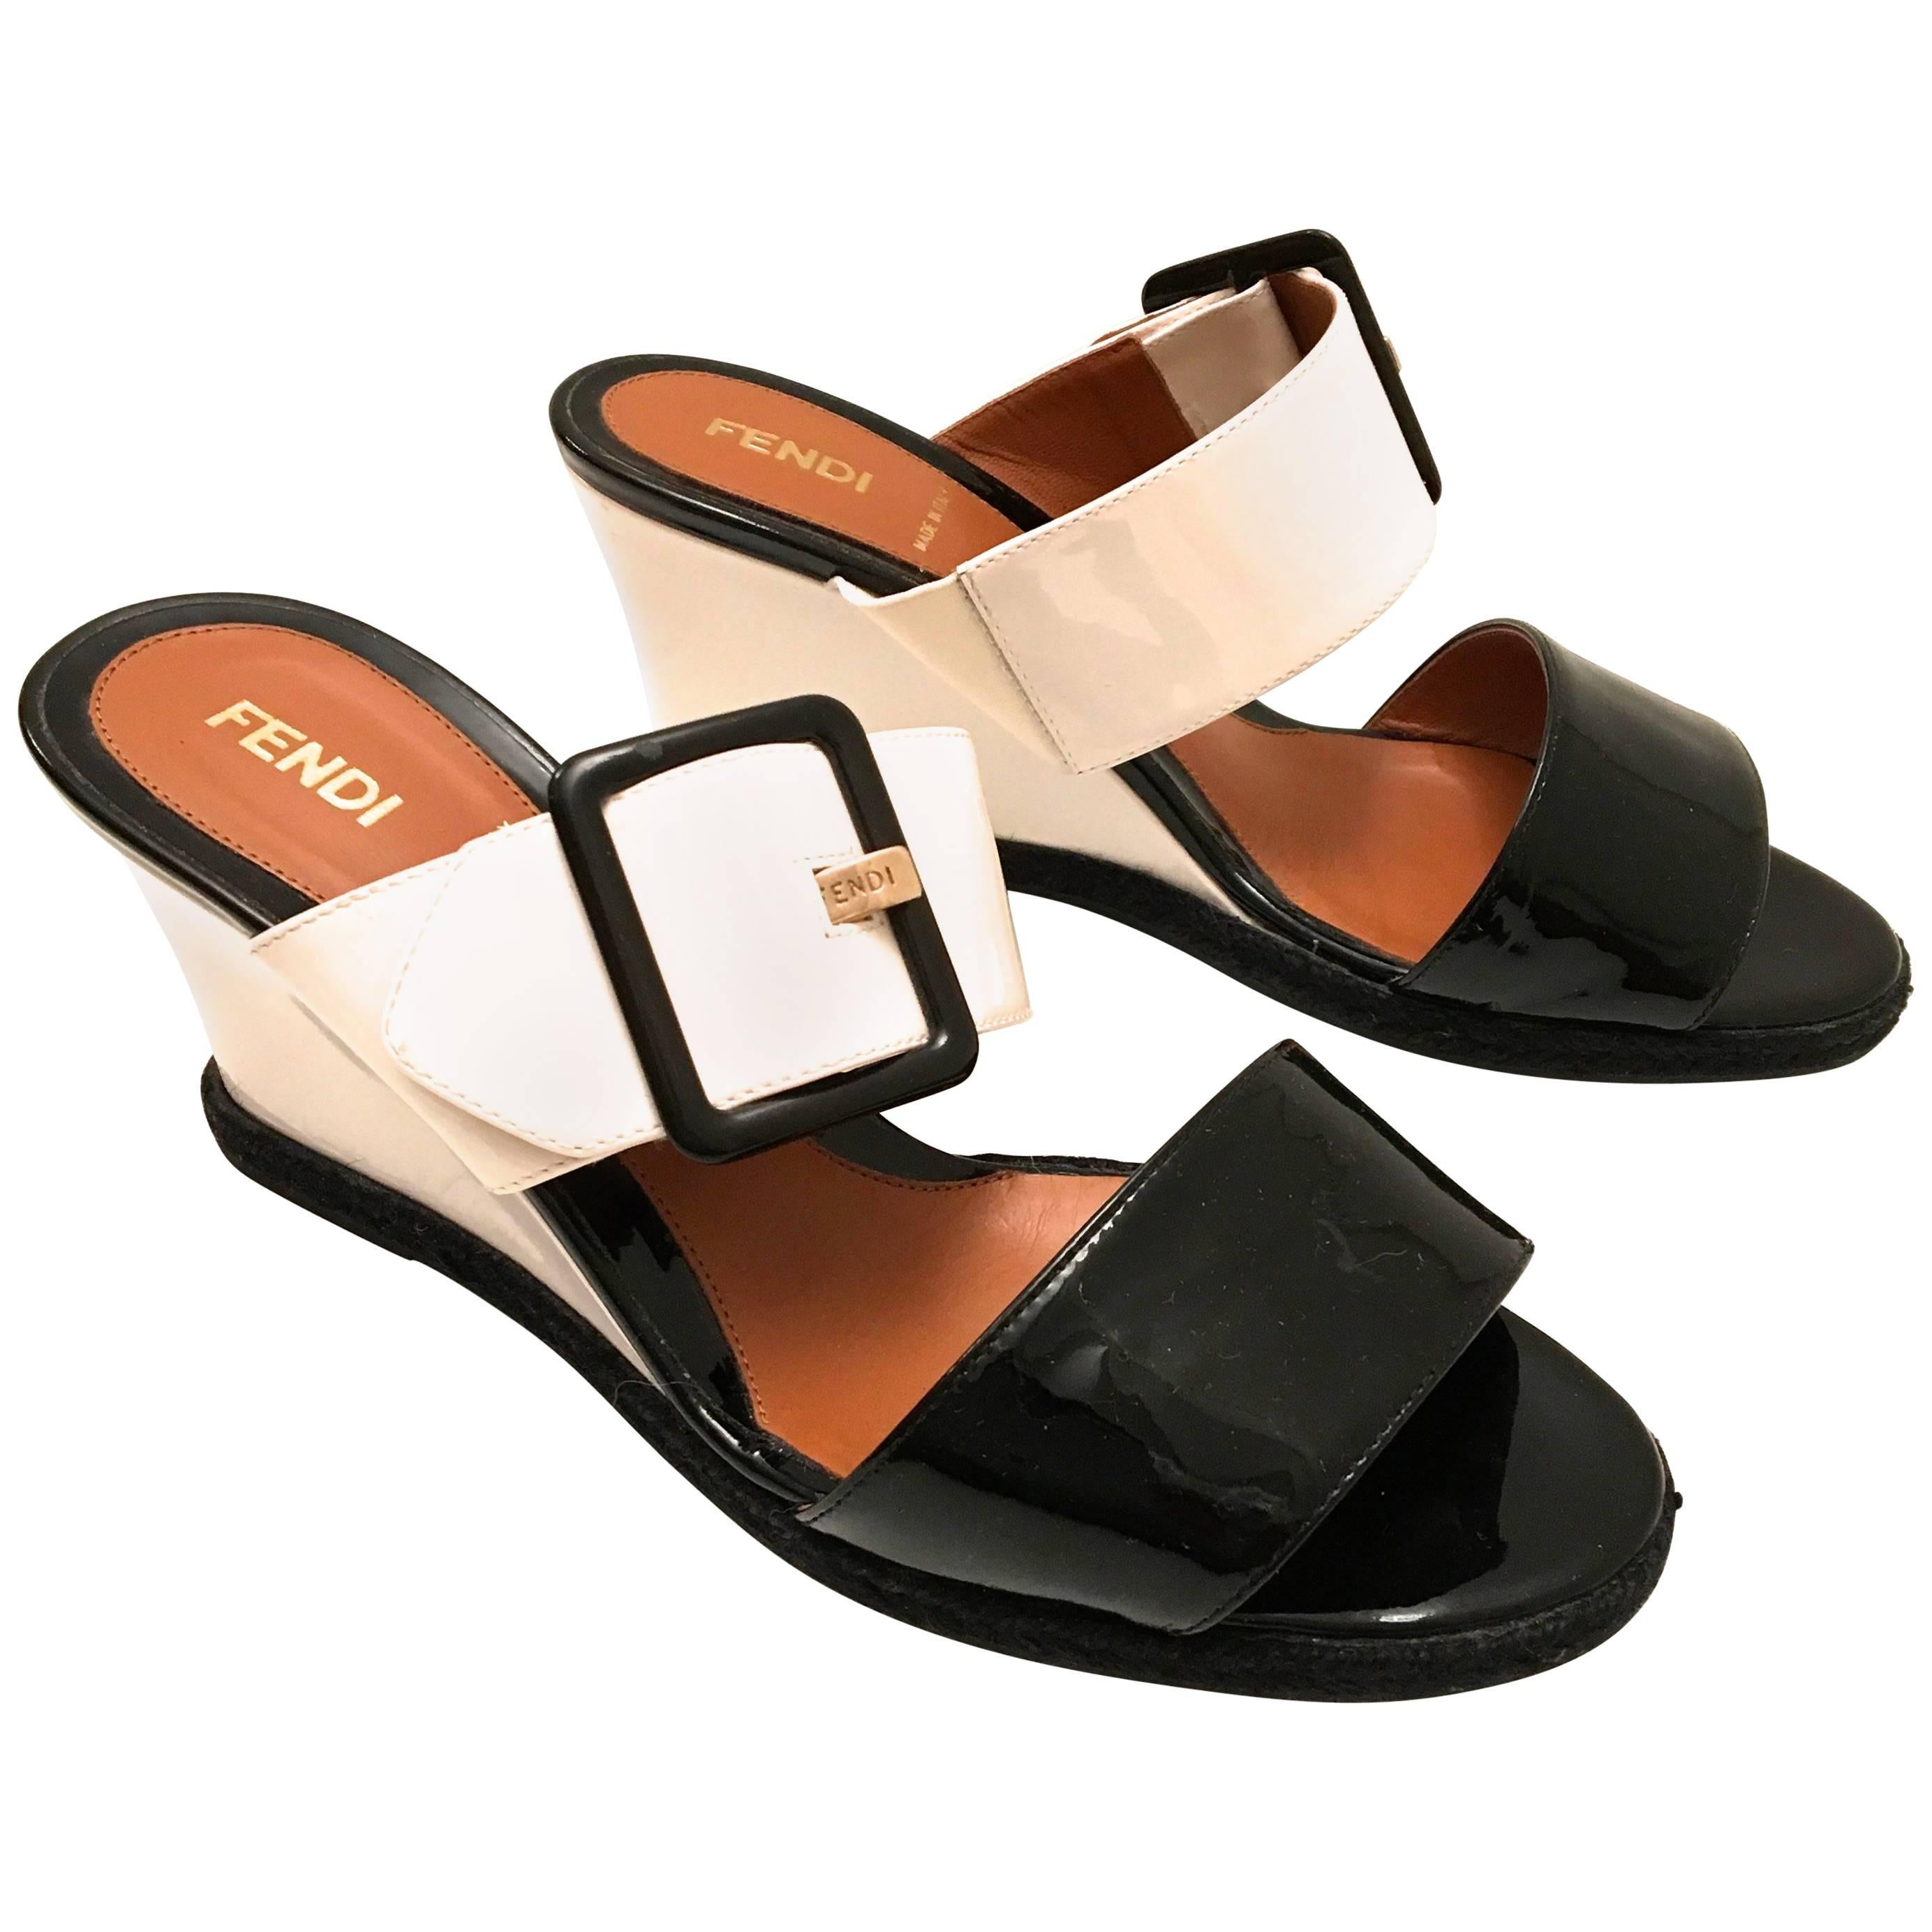 Fendi Patent Leather Wedges - Black and White - Size 37.5 For Sale